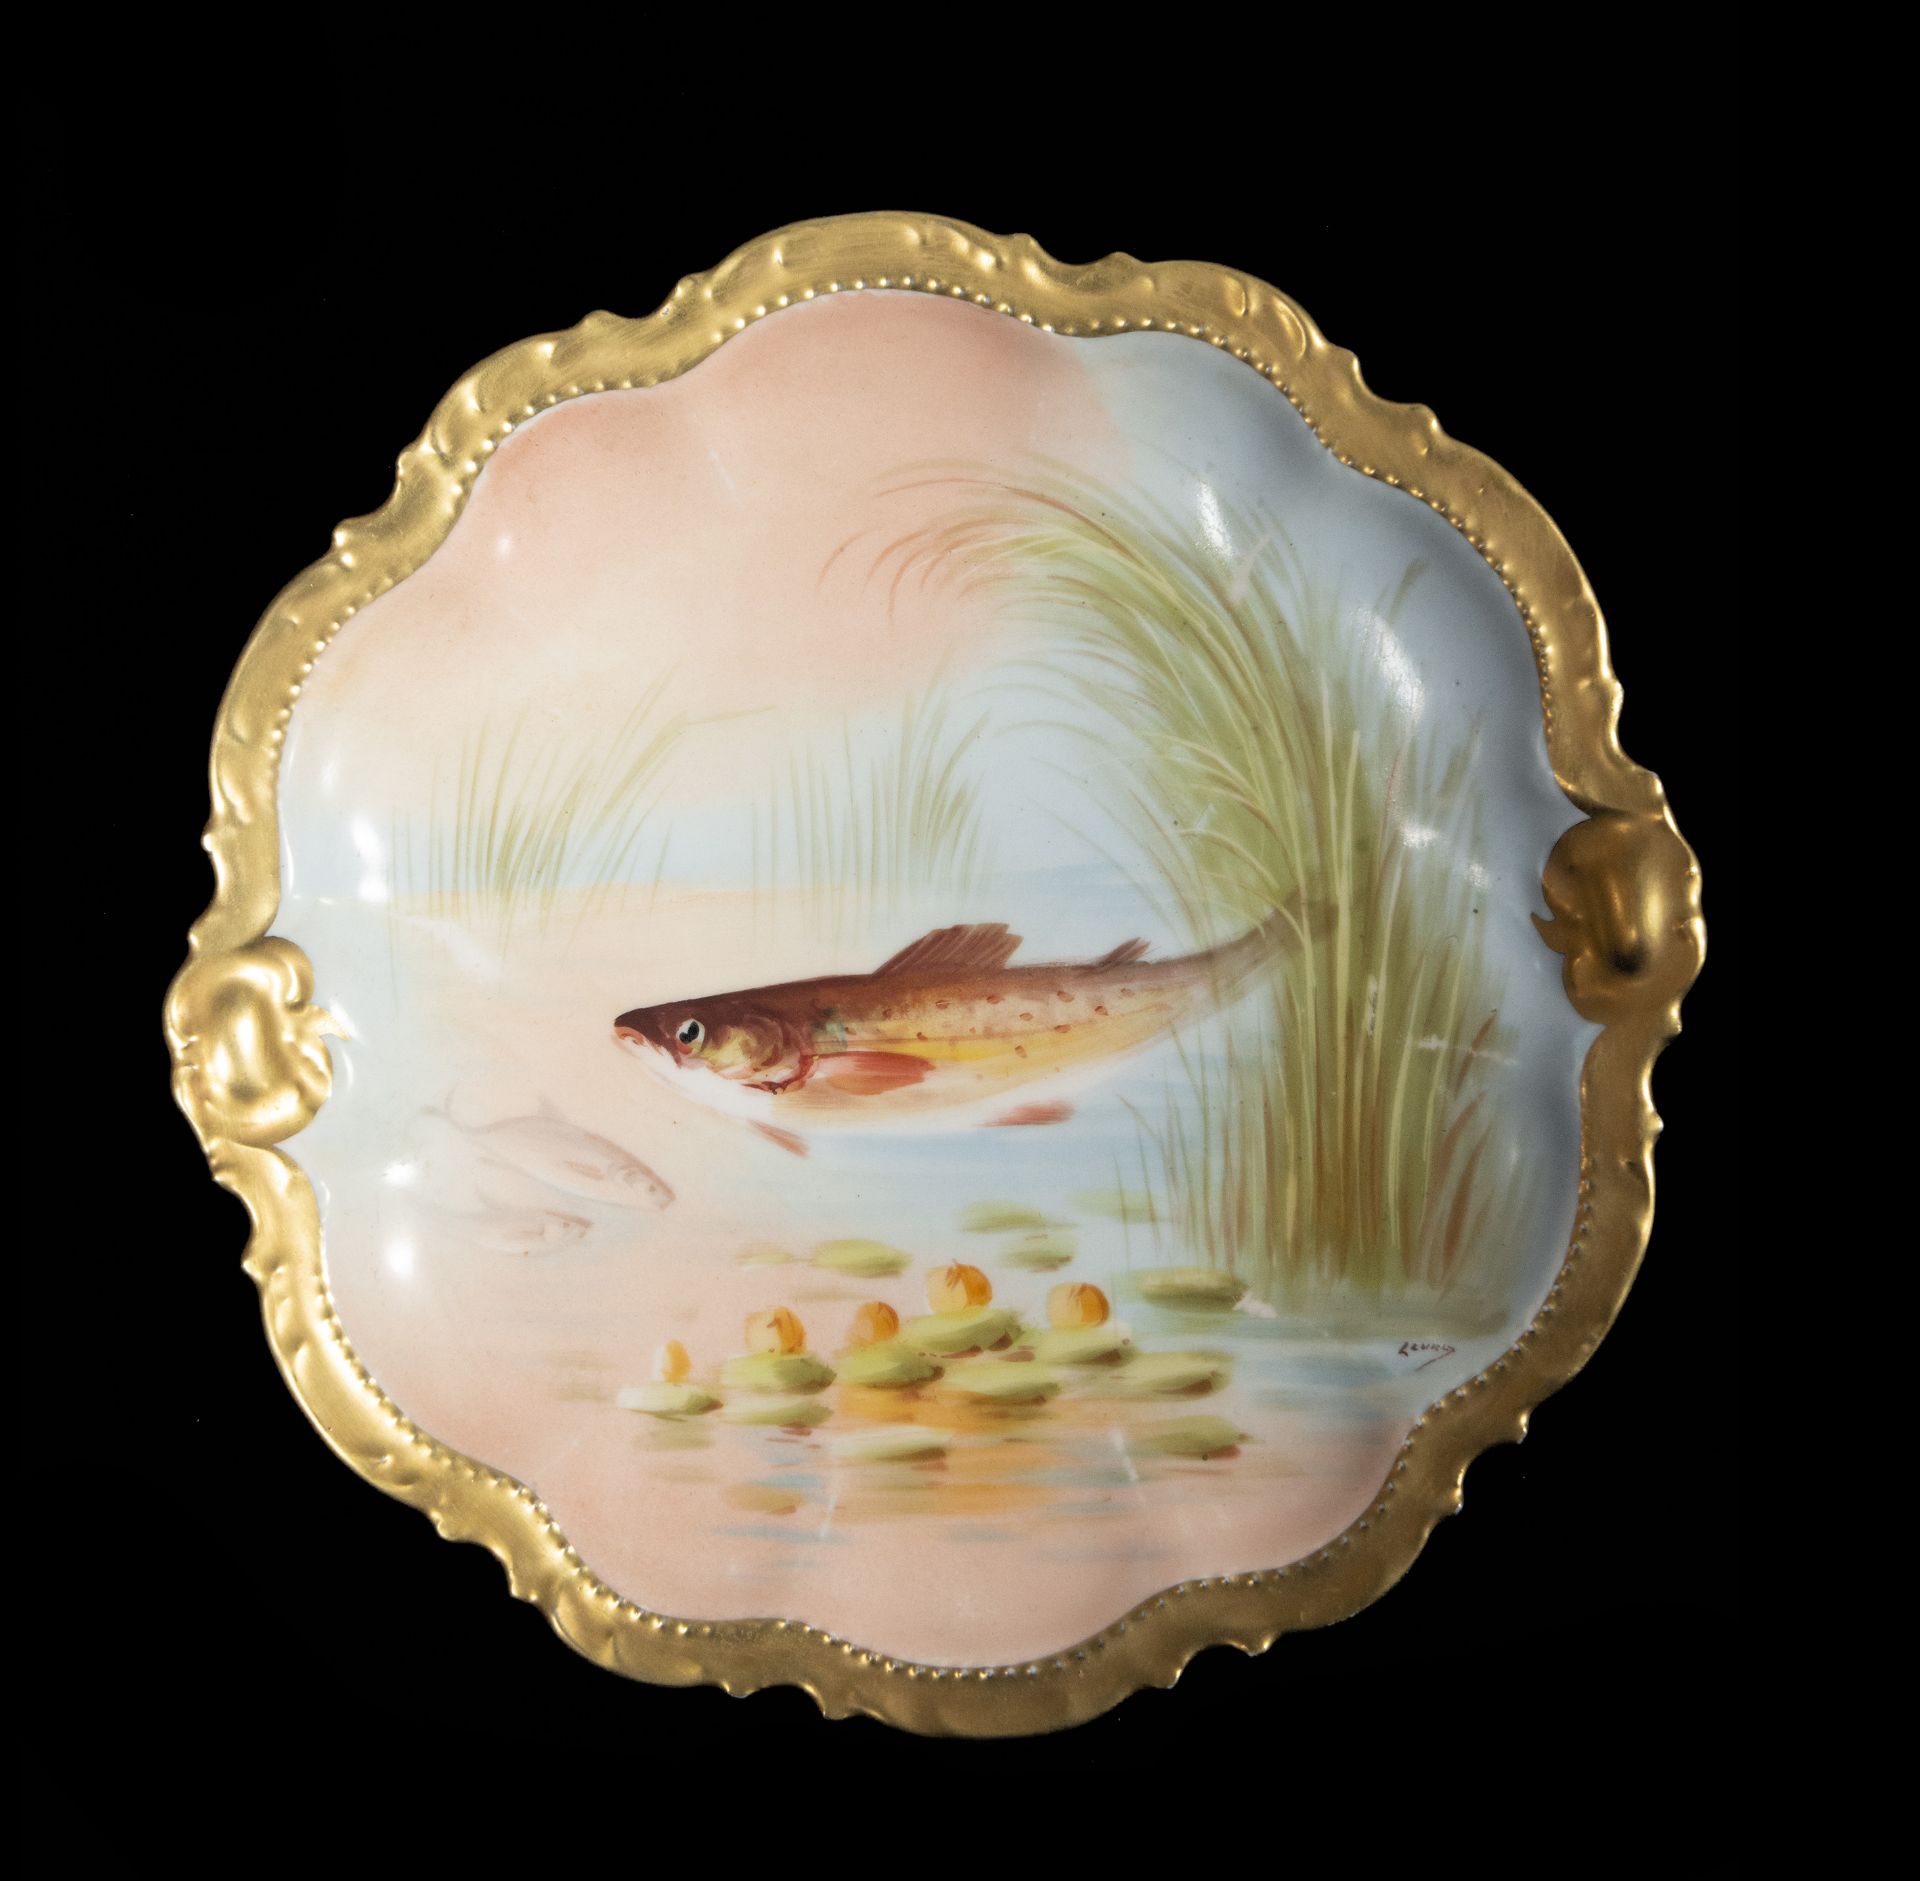 19th Century Limoges Porcelain Fish Dinnerware Set by the Count of Artois, 19th Century - Image 2 of 12